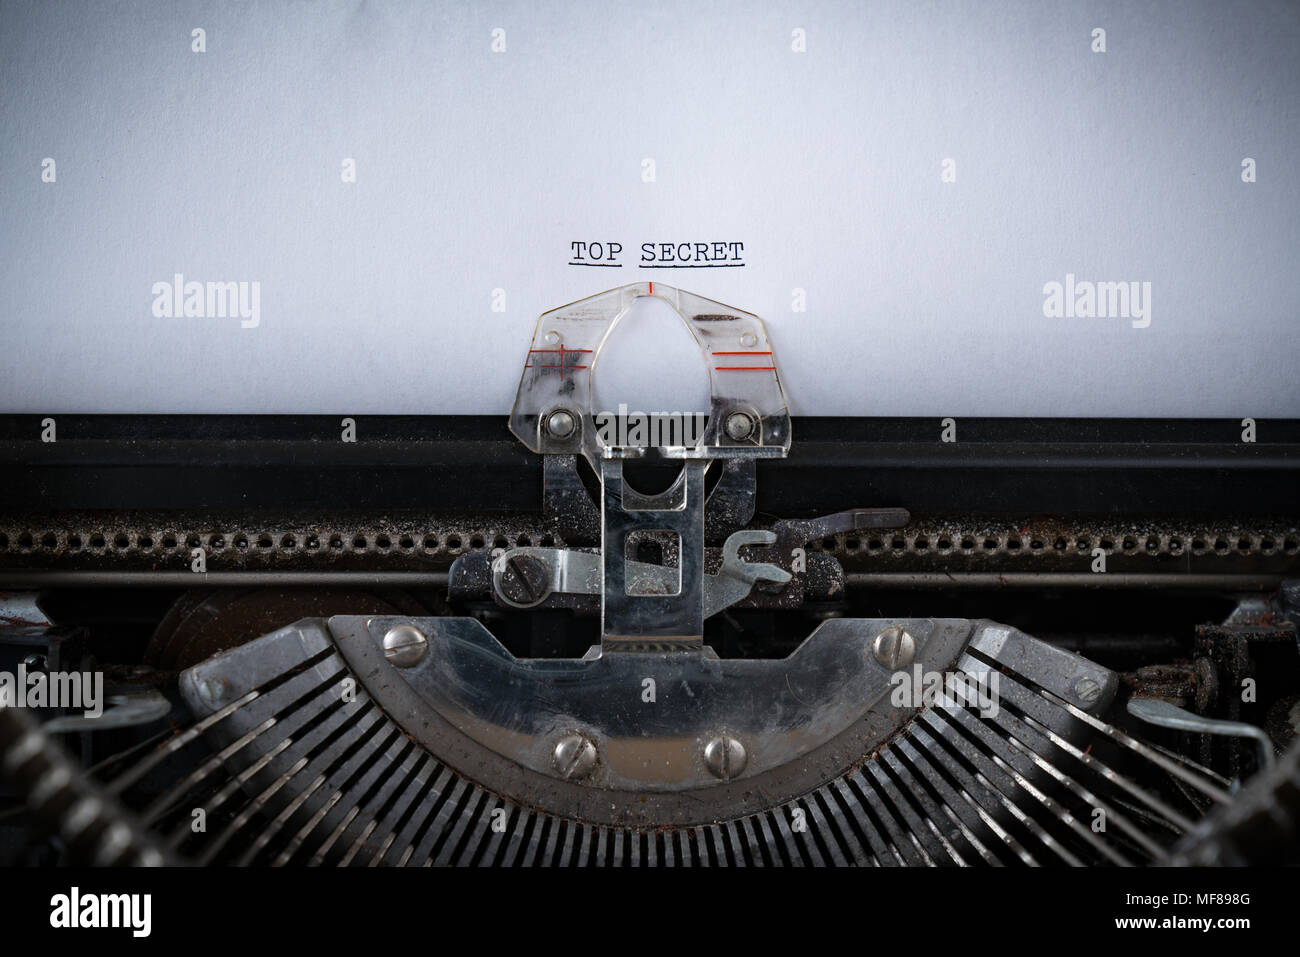 The phrase Top Secret typed on an old Typewriter Stock Photo